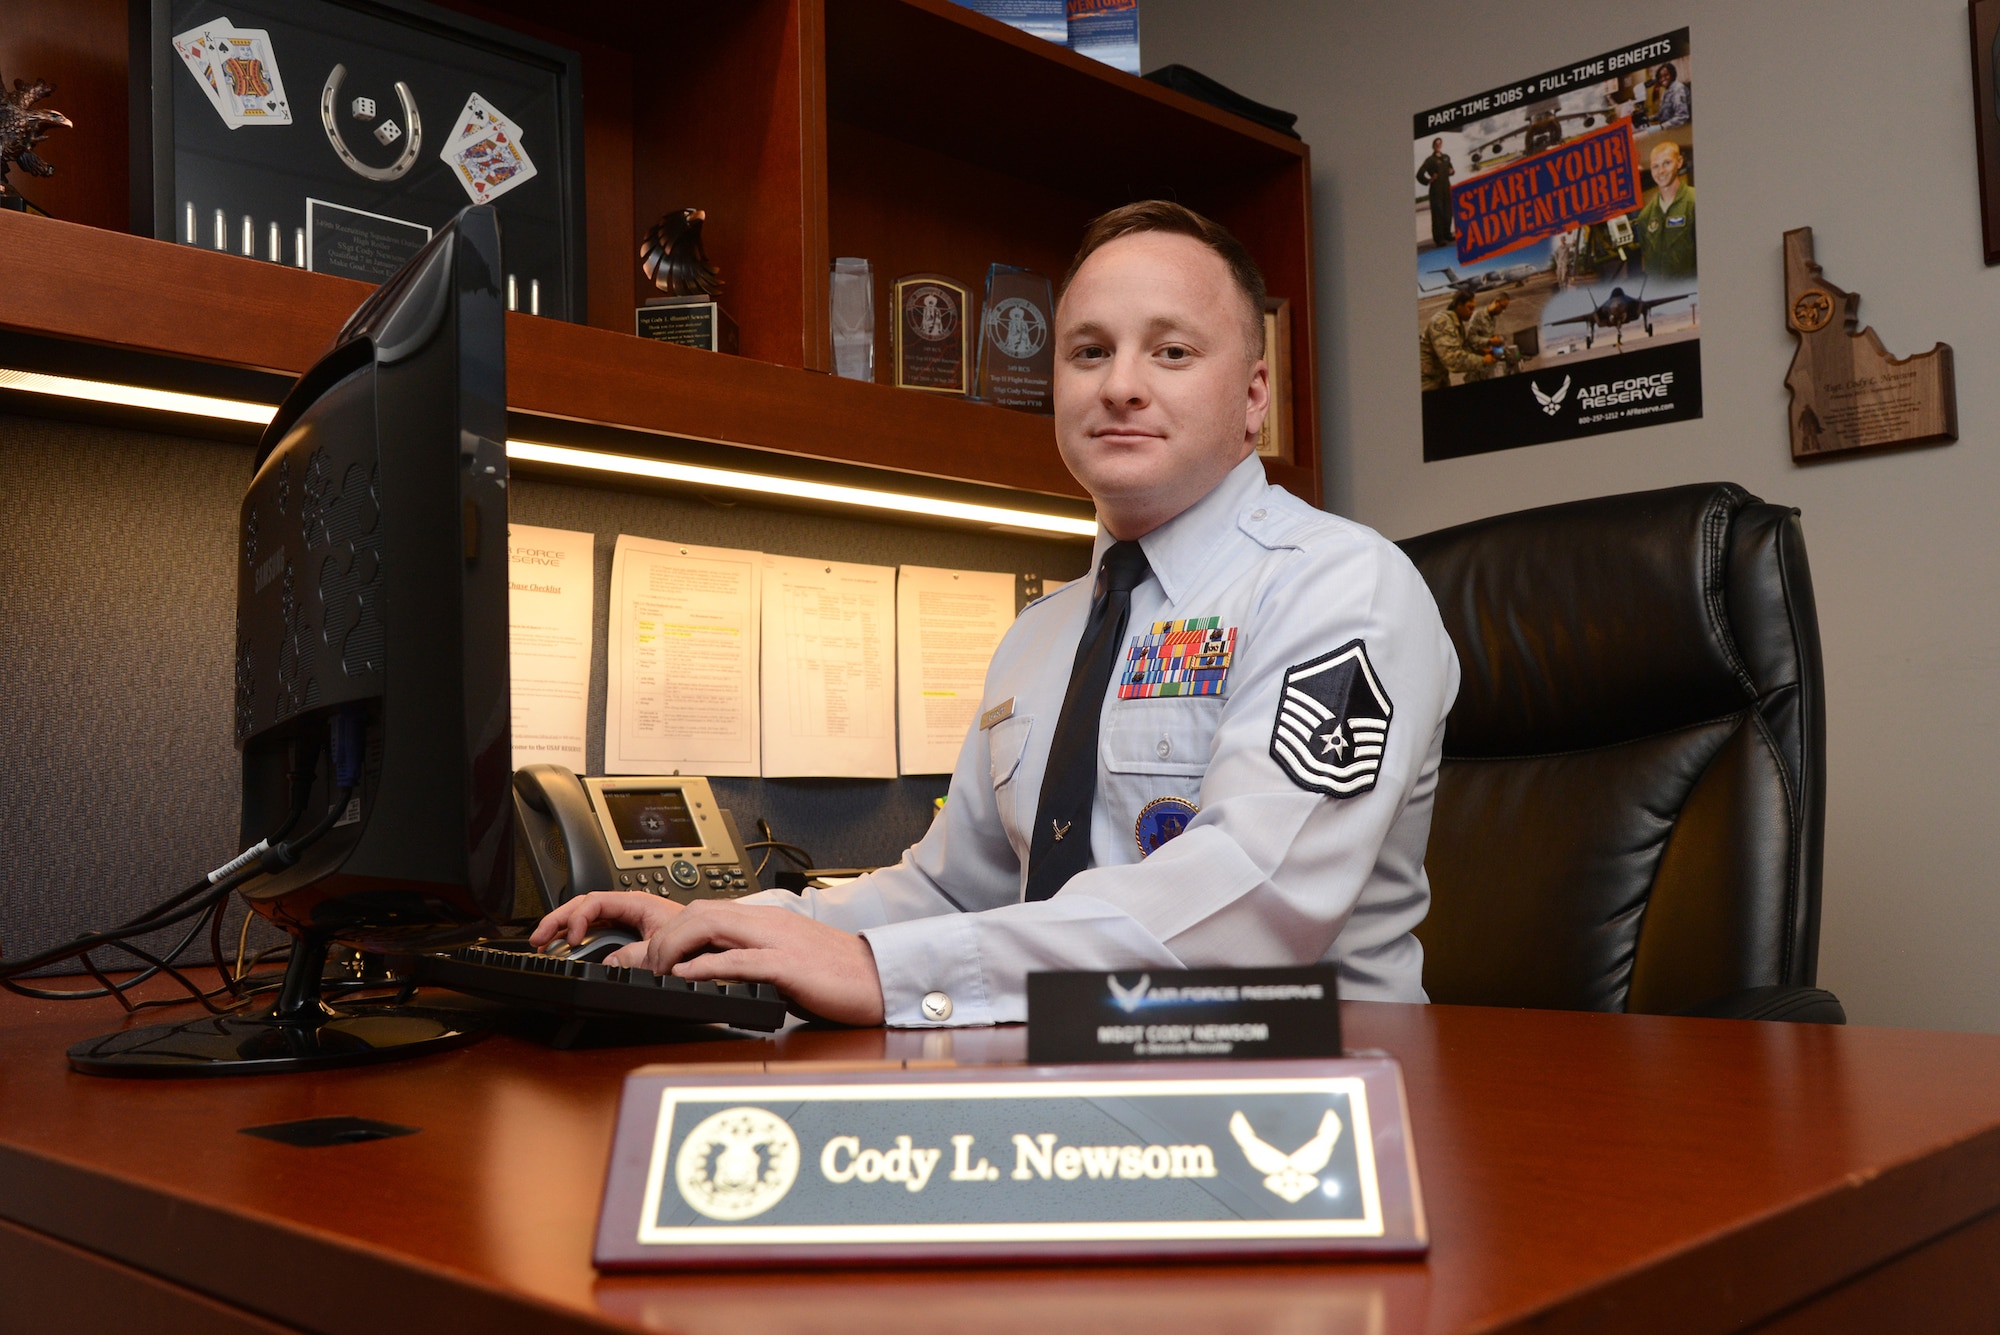 Master Sgt. Cody Newsom is Tinker’s In-Service Recruiter for service members wanting to transfer from active duty into the Air Force Reserve.